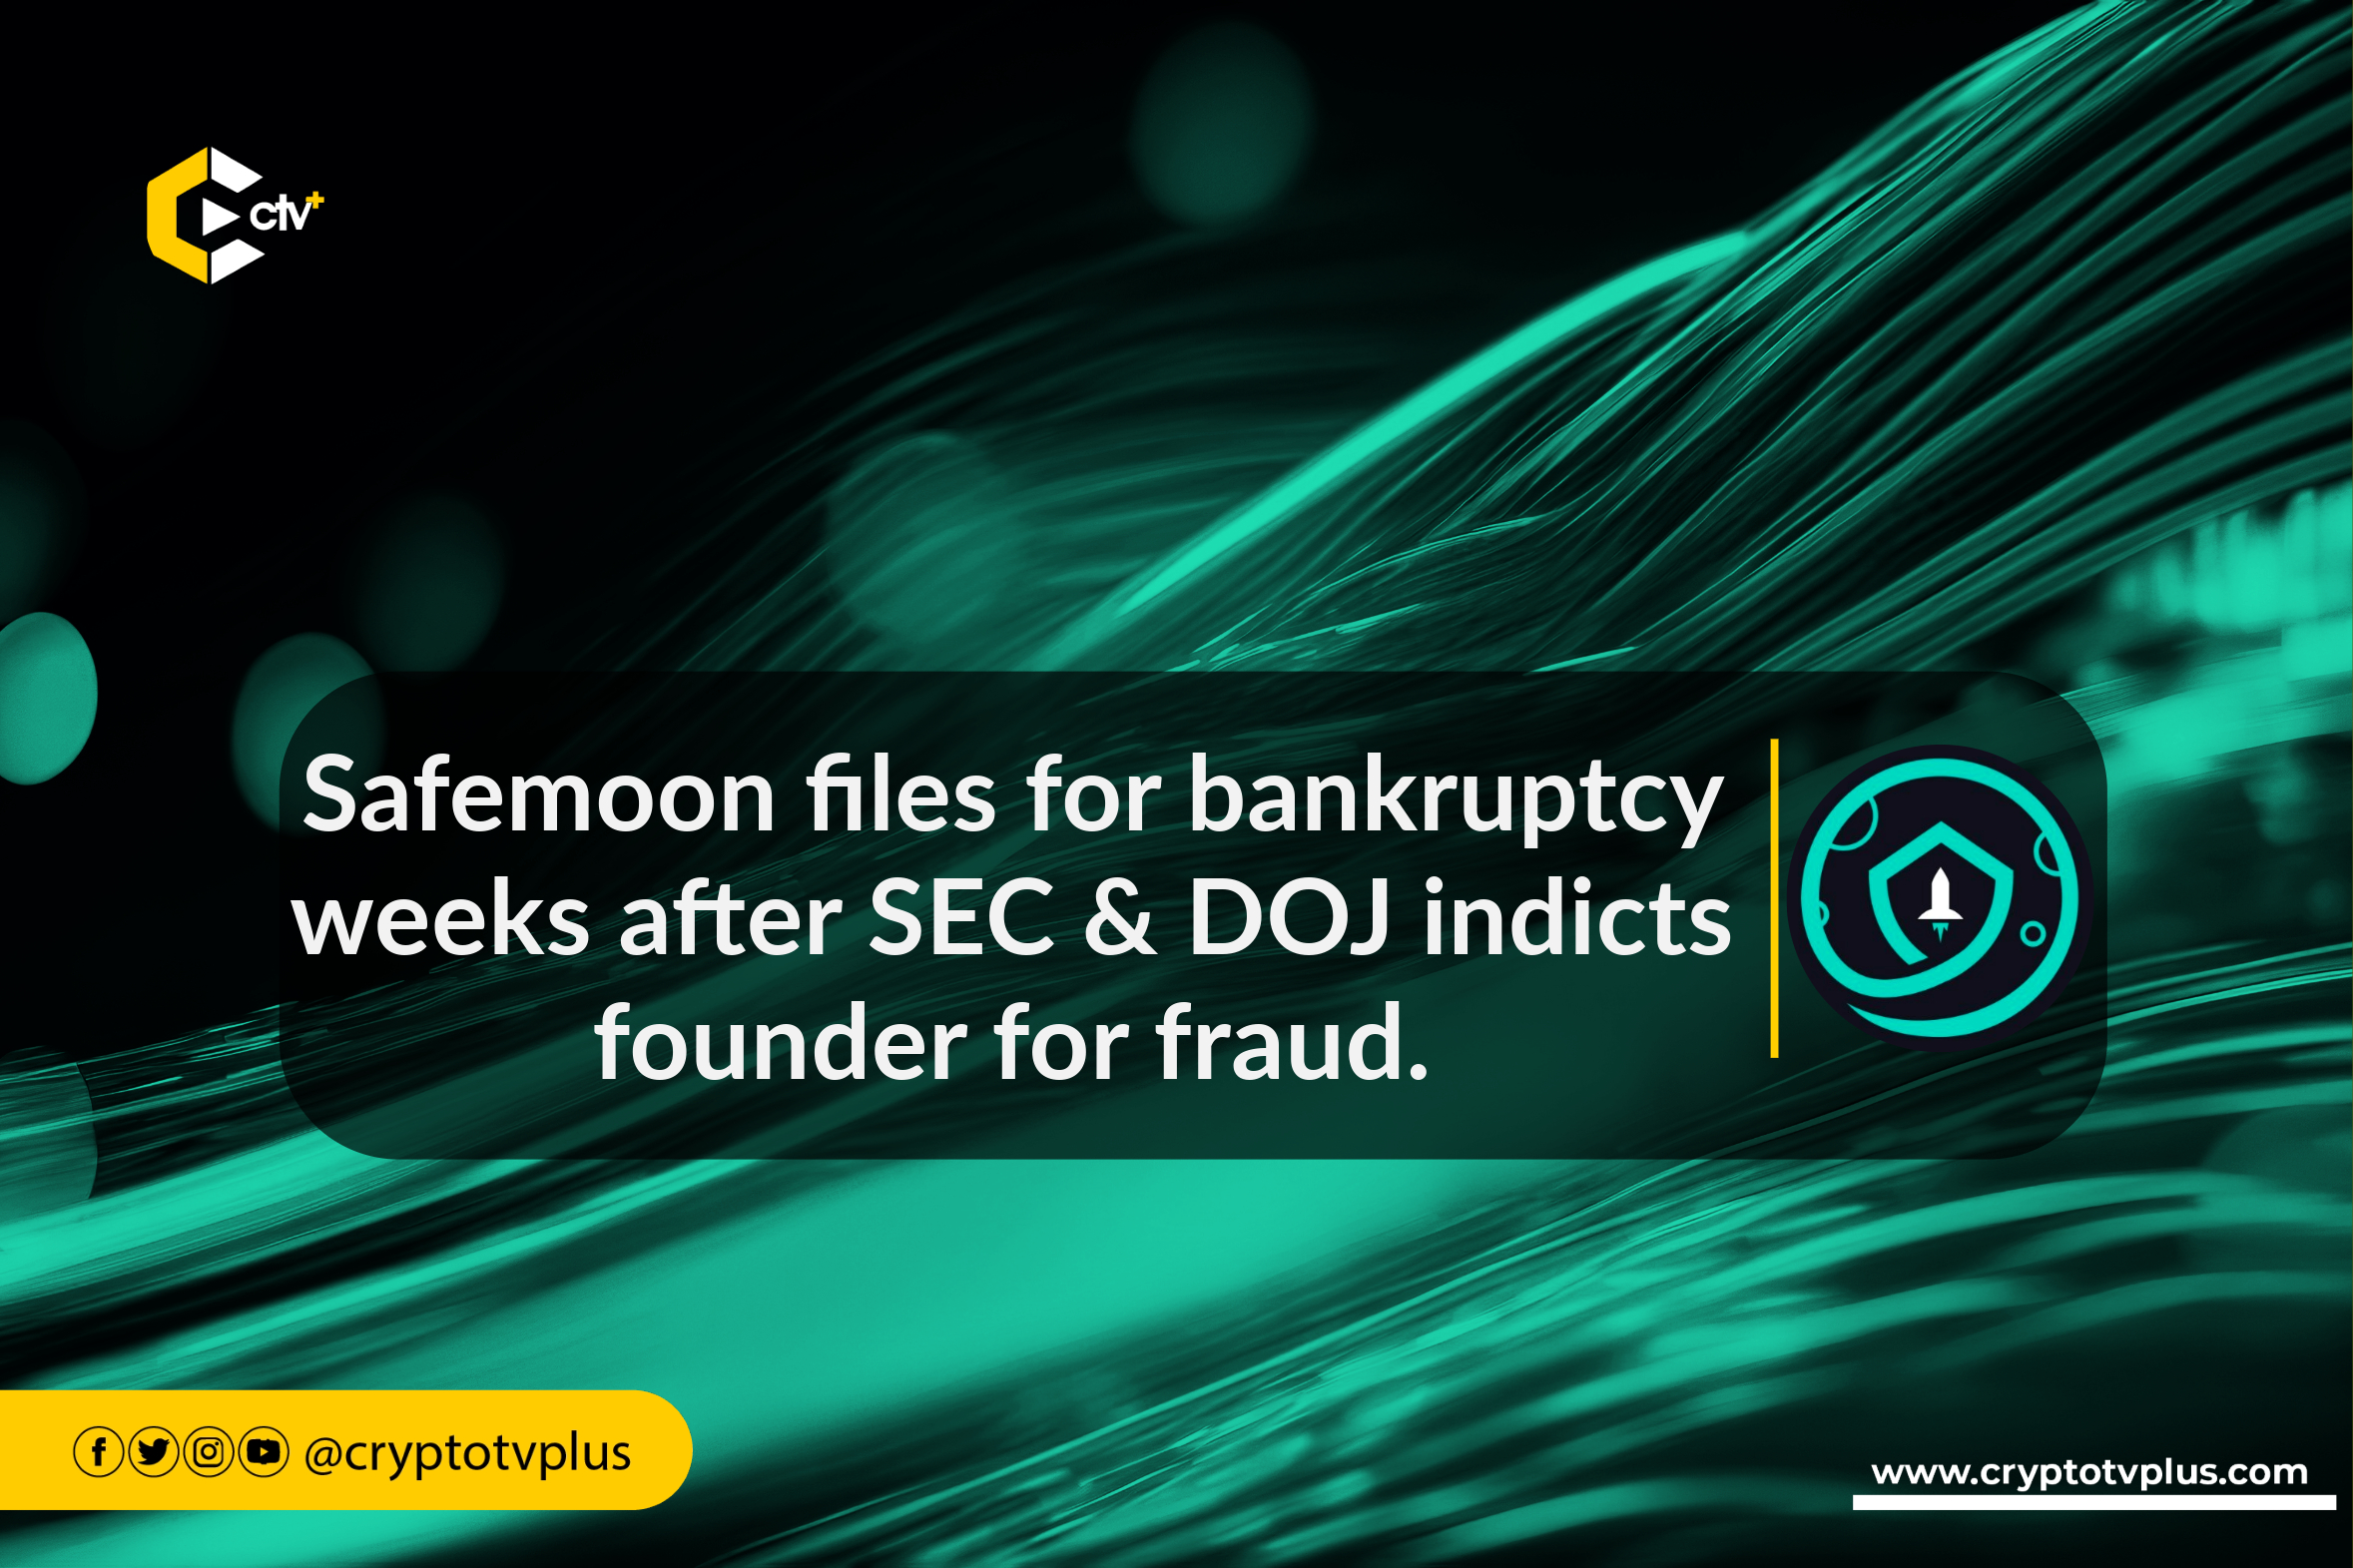 Safemoon files for bankruptcy weeks after SEC & DOJ indicts founder for fraud.